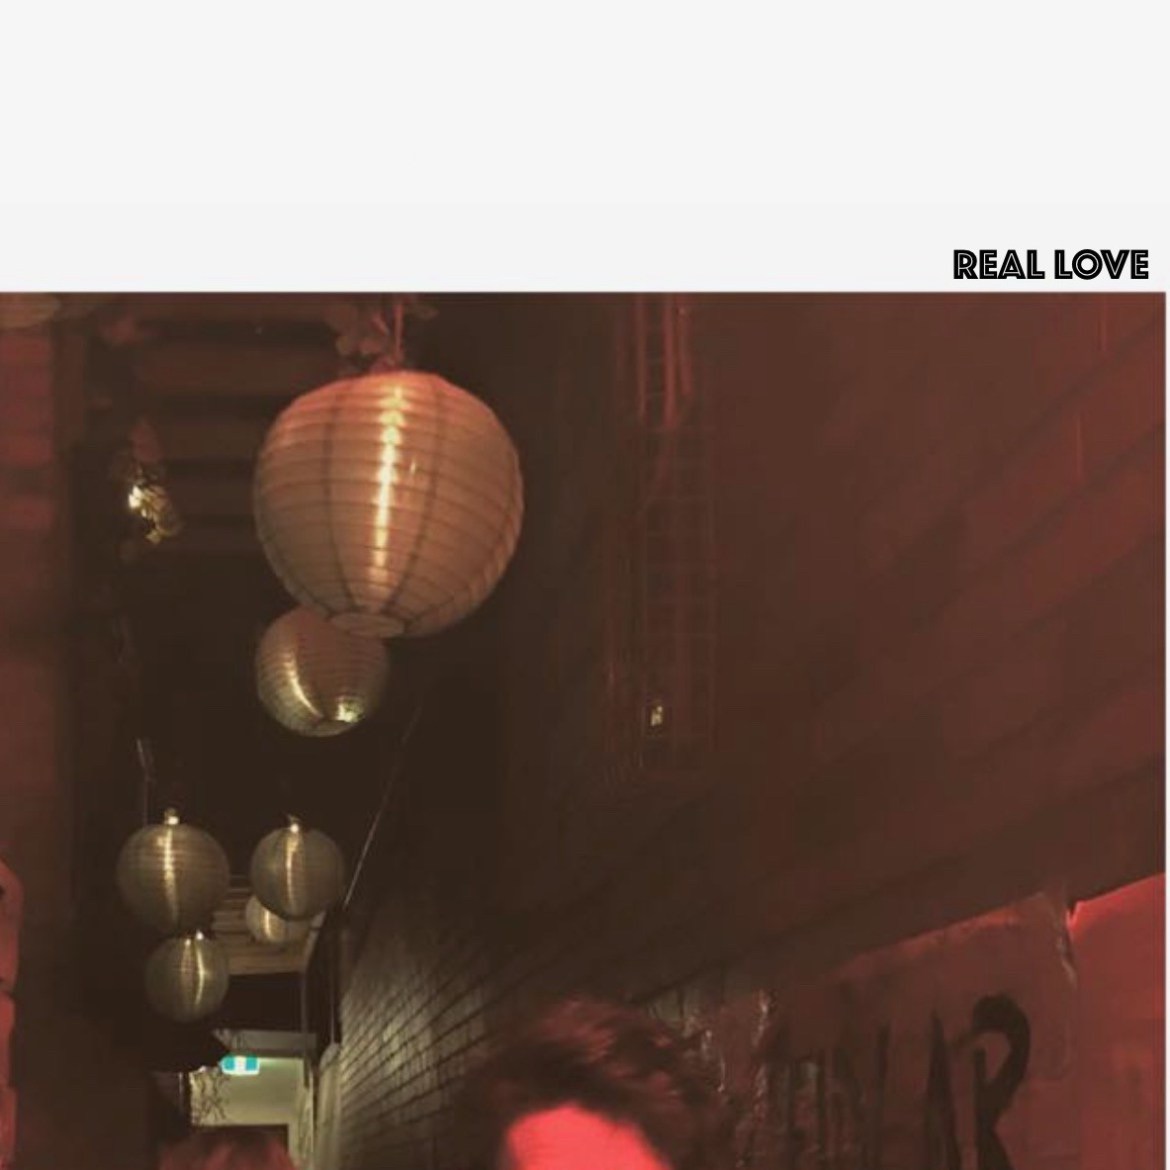 Ali Morrison Brings The Quiet Storm On “Real Love” Single